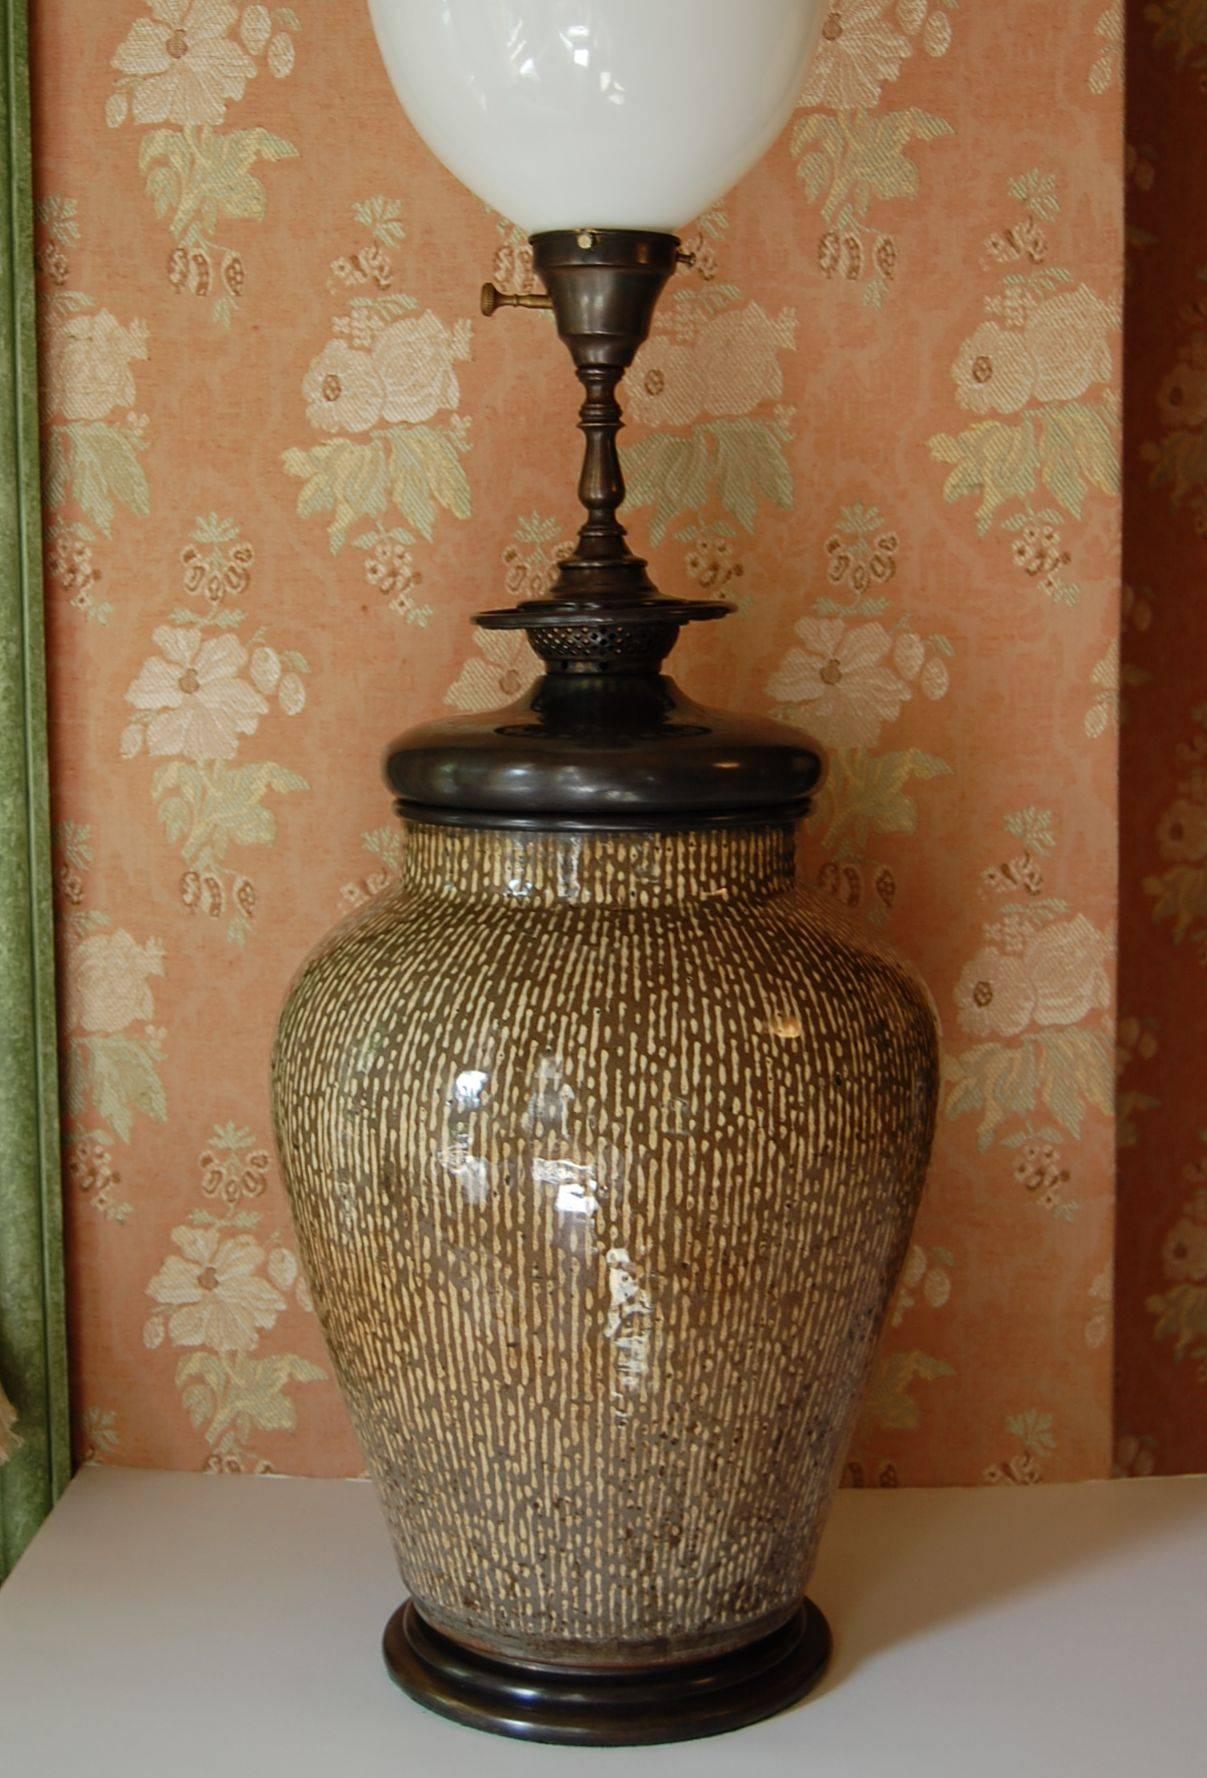 Wonderful large Asian, possibly Chinese or Korean urn wired as a lamp with original turn of the century base and fittings. Could have originally been an oil lamp. Olive and ecru colored strike' glaze. Just cleaned and rewired with a three-way